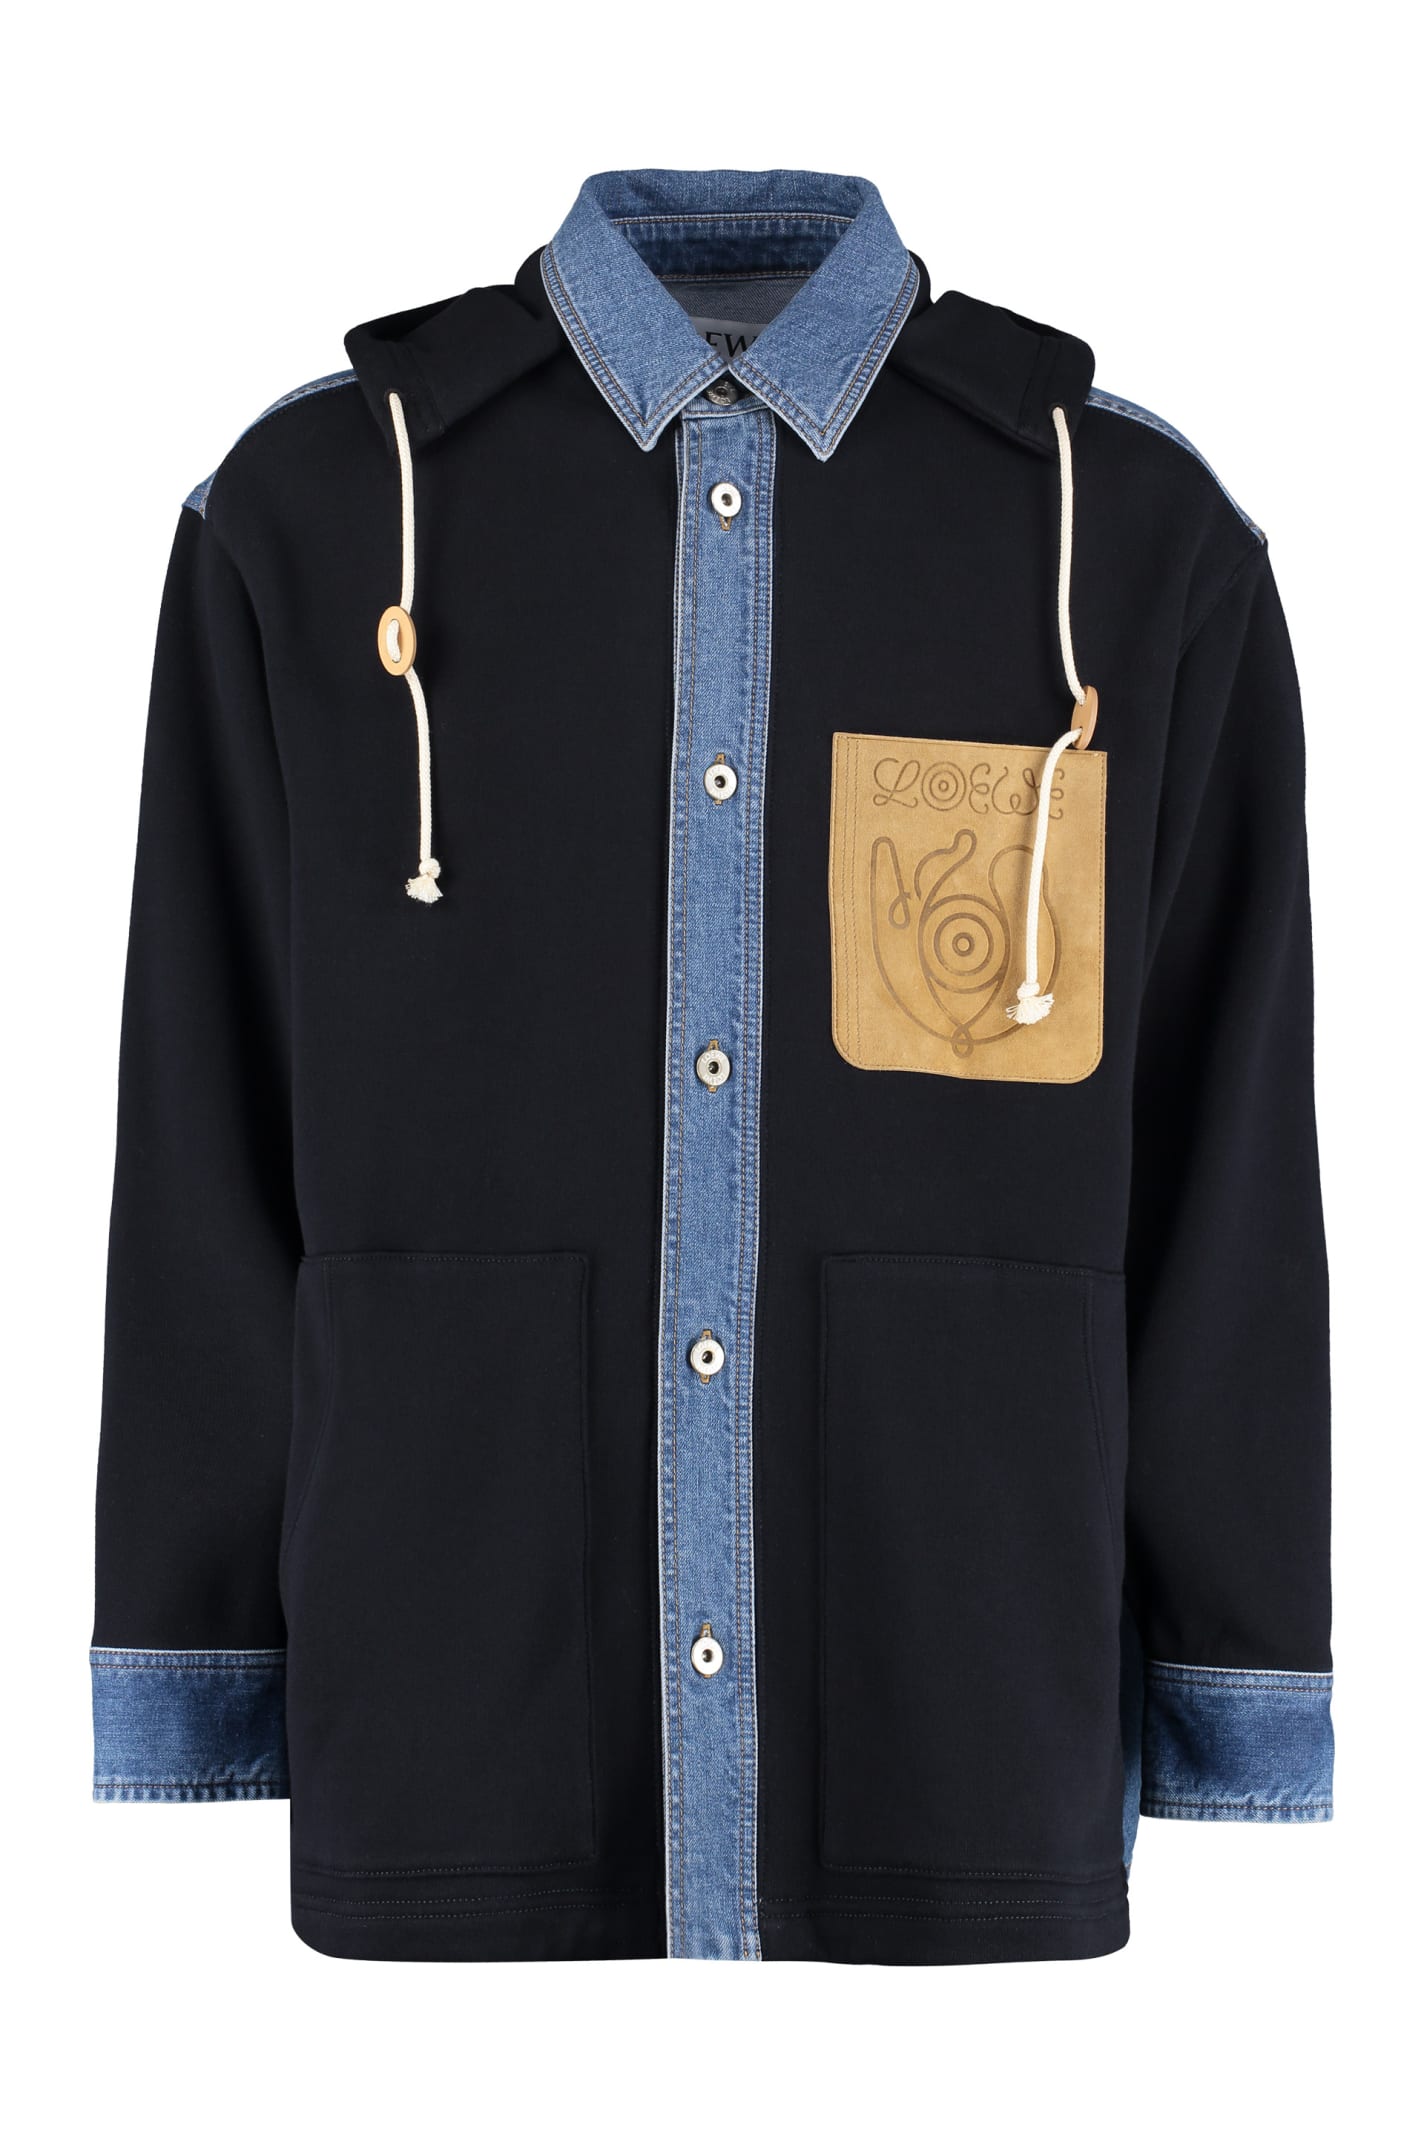 Loewe Embroidered Patches Denim Shirt